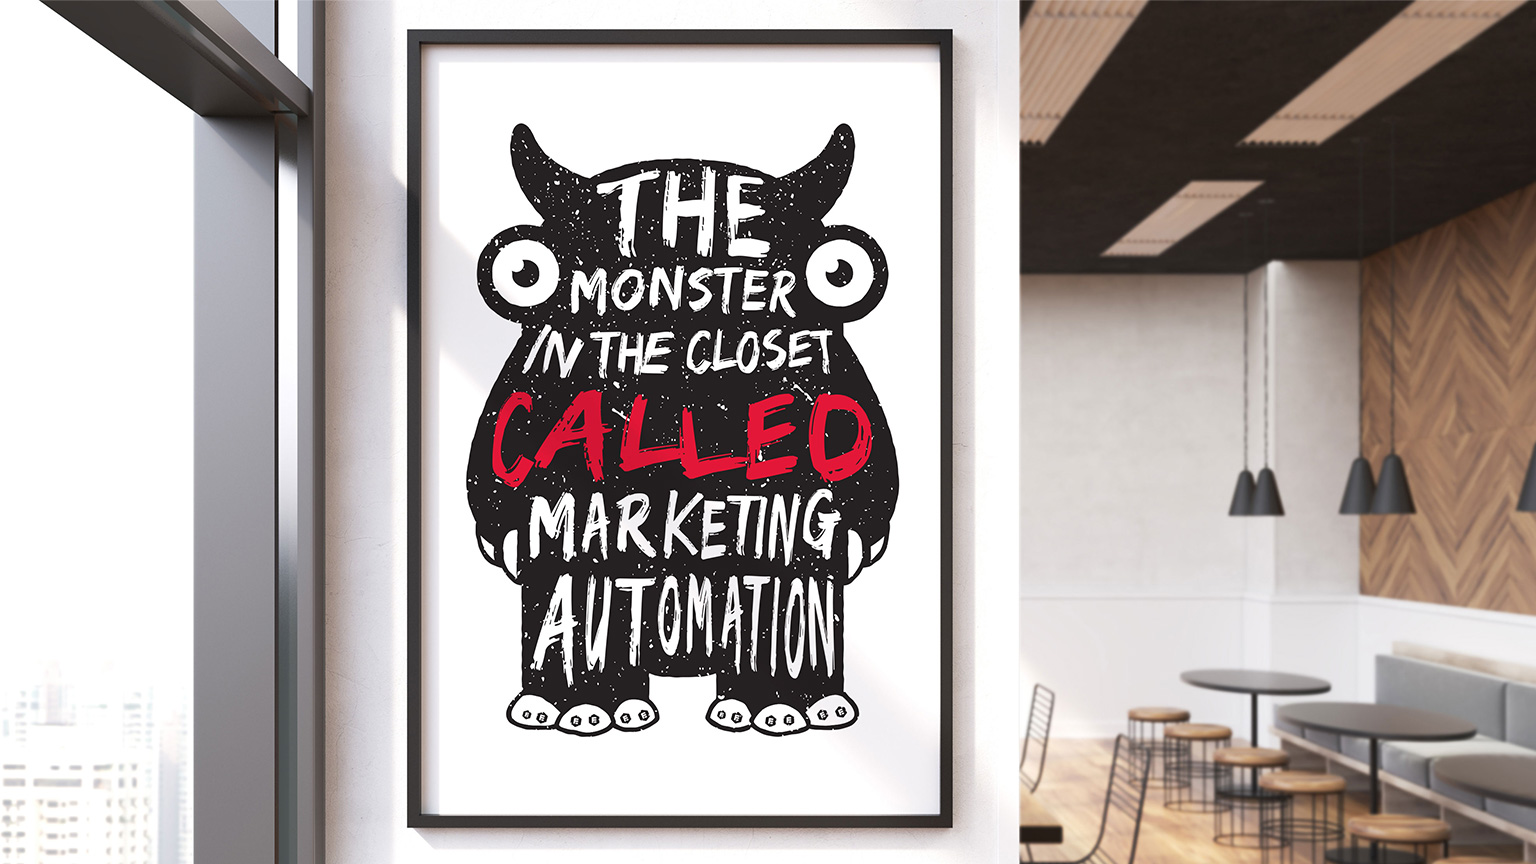 The monster in the closet called marketing automation.